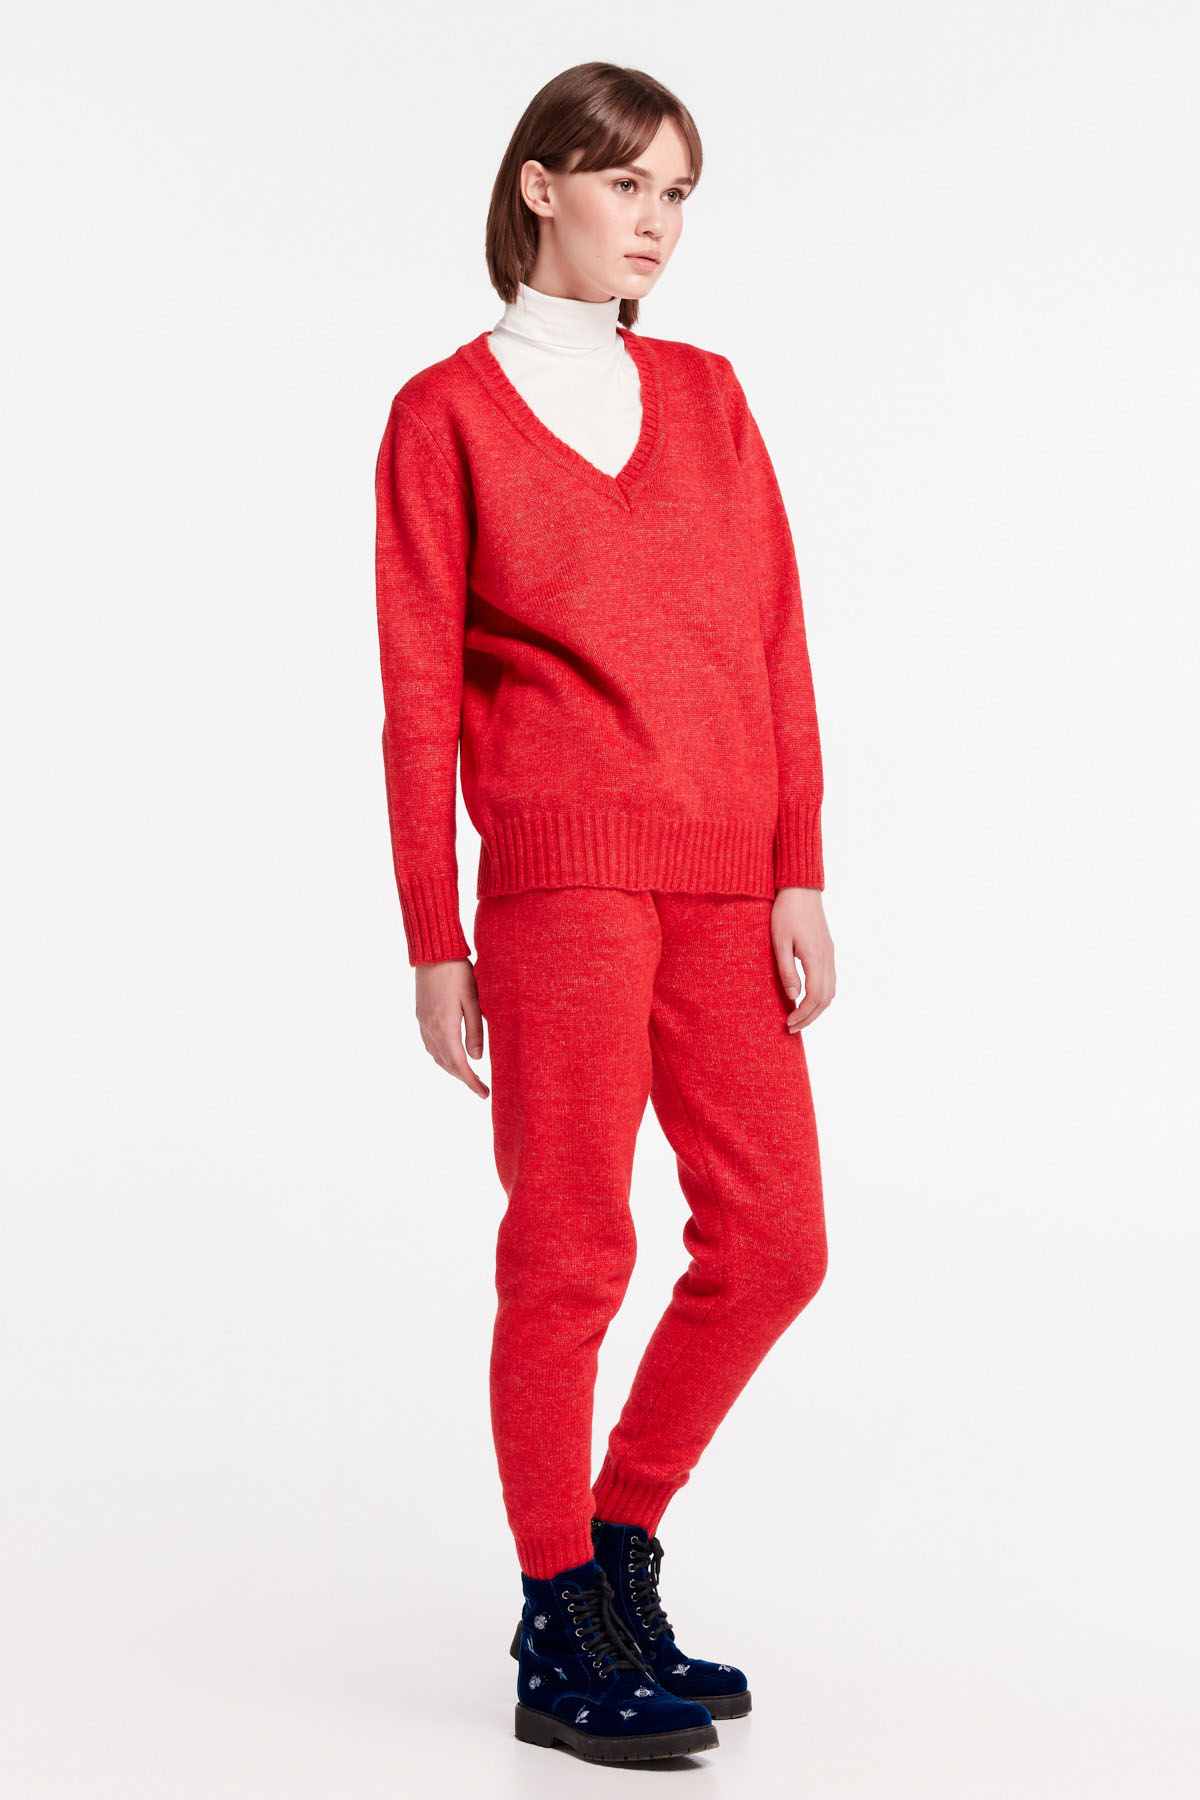 Red V-neck sweater, photo 6